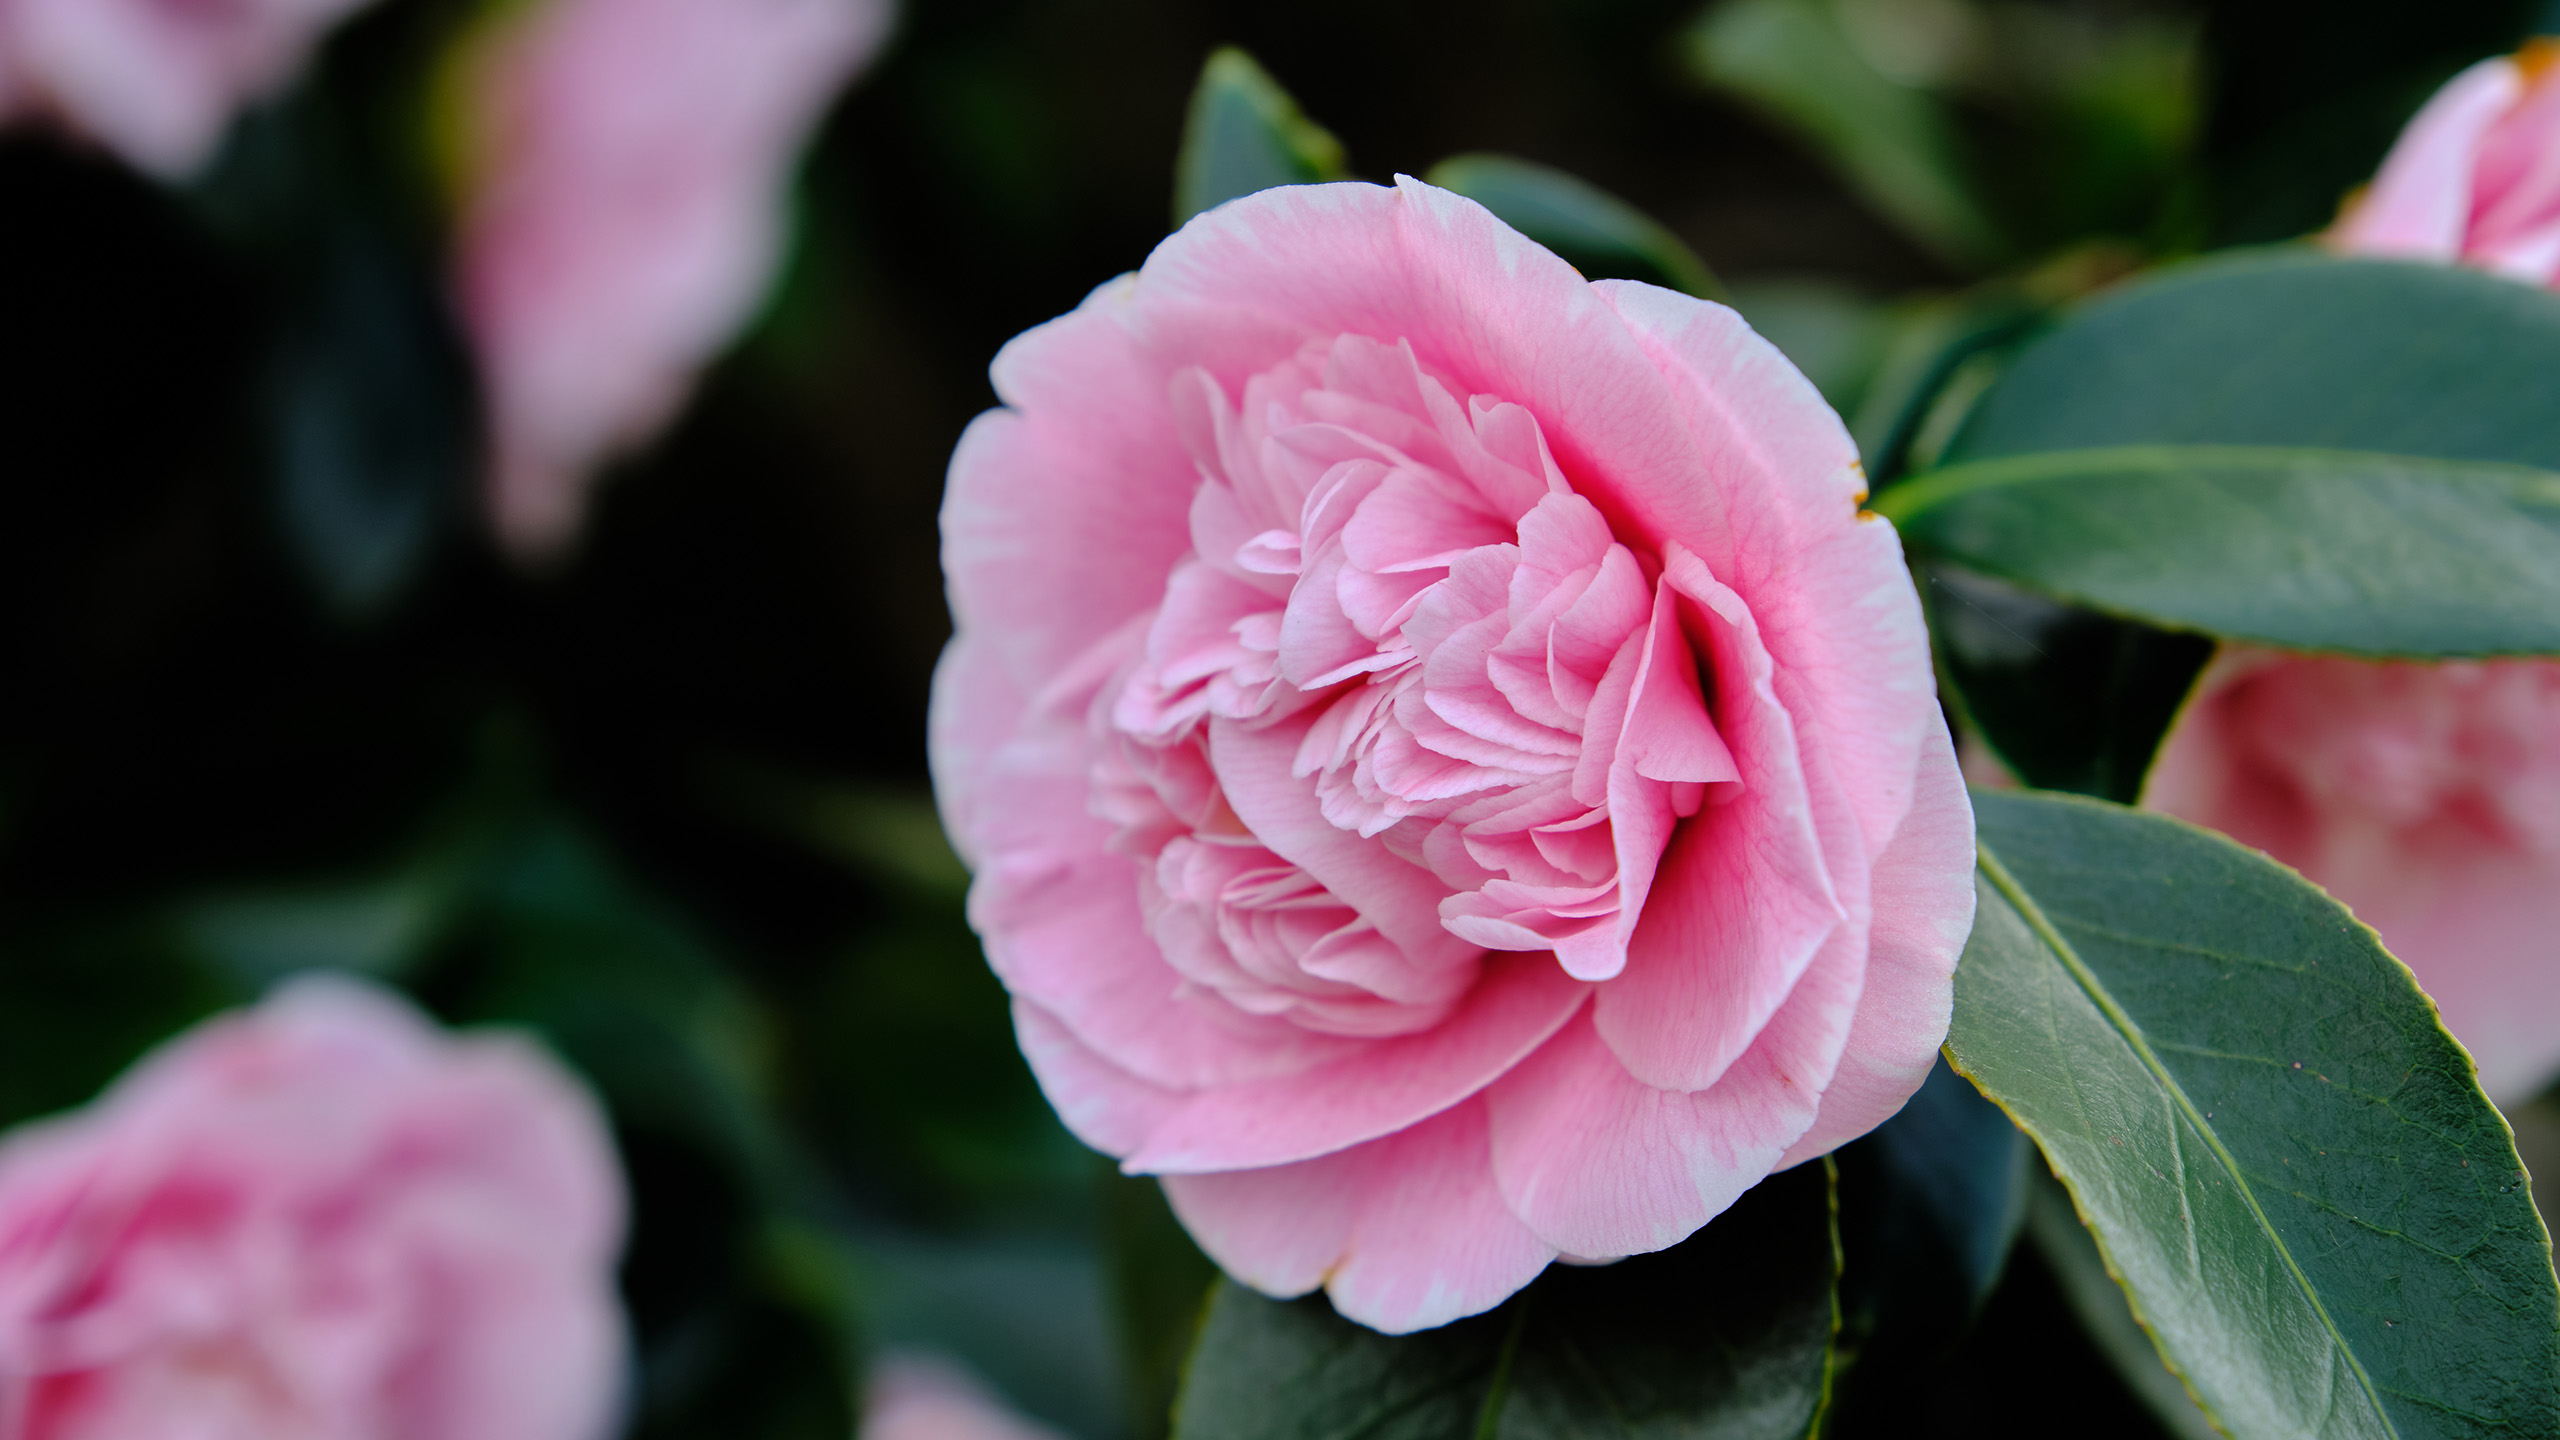 A close up of a pink camellia flower and three green leaves